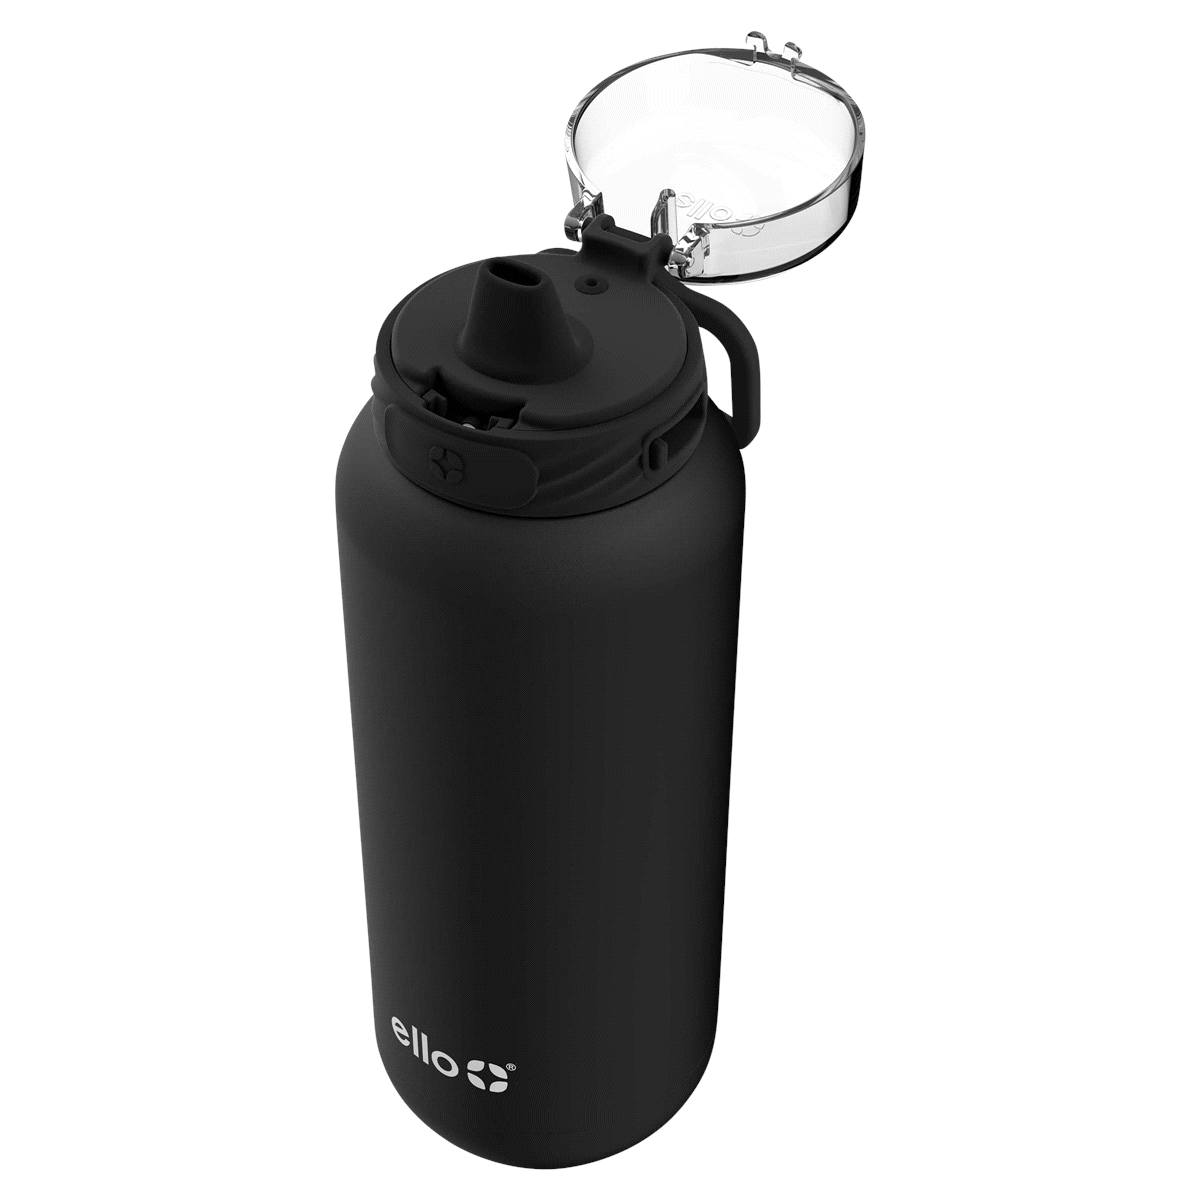 Ello Products on Instagram: Did you know we offer a Cooper 32oz